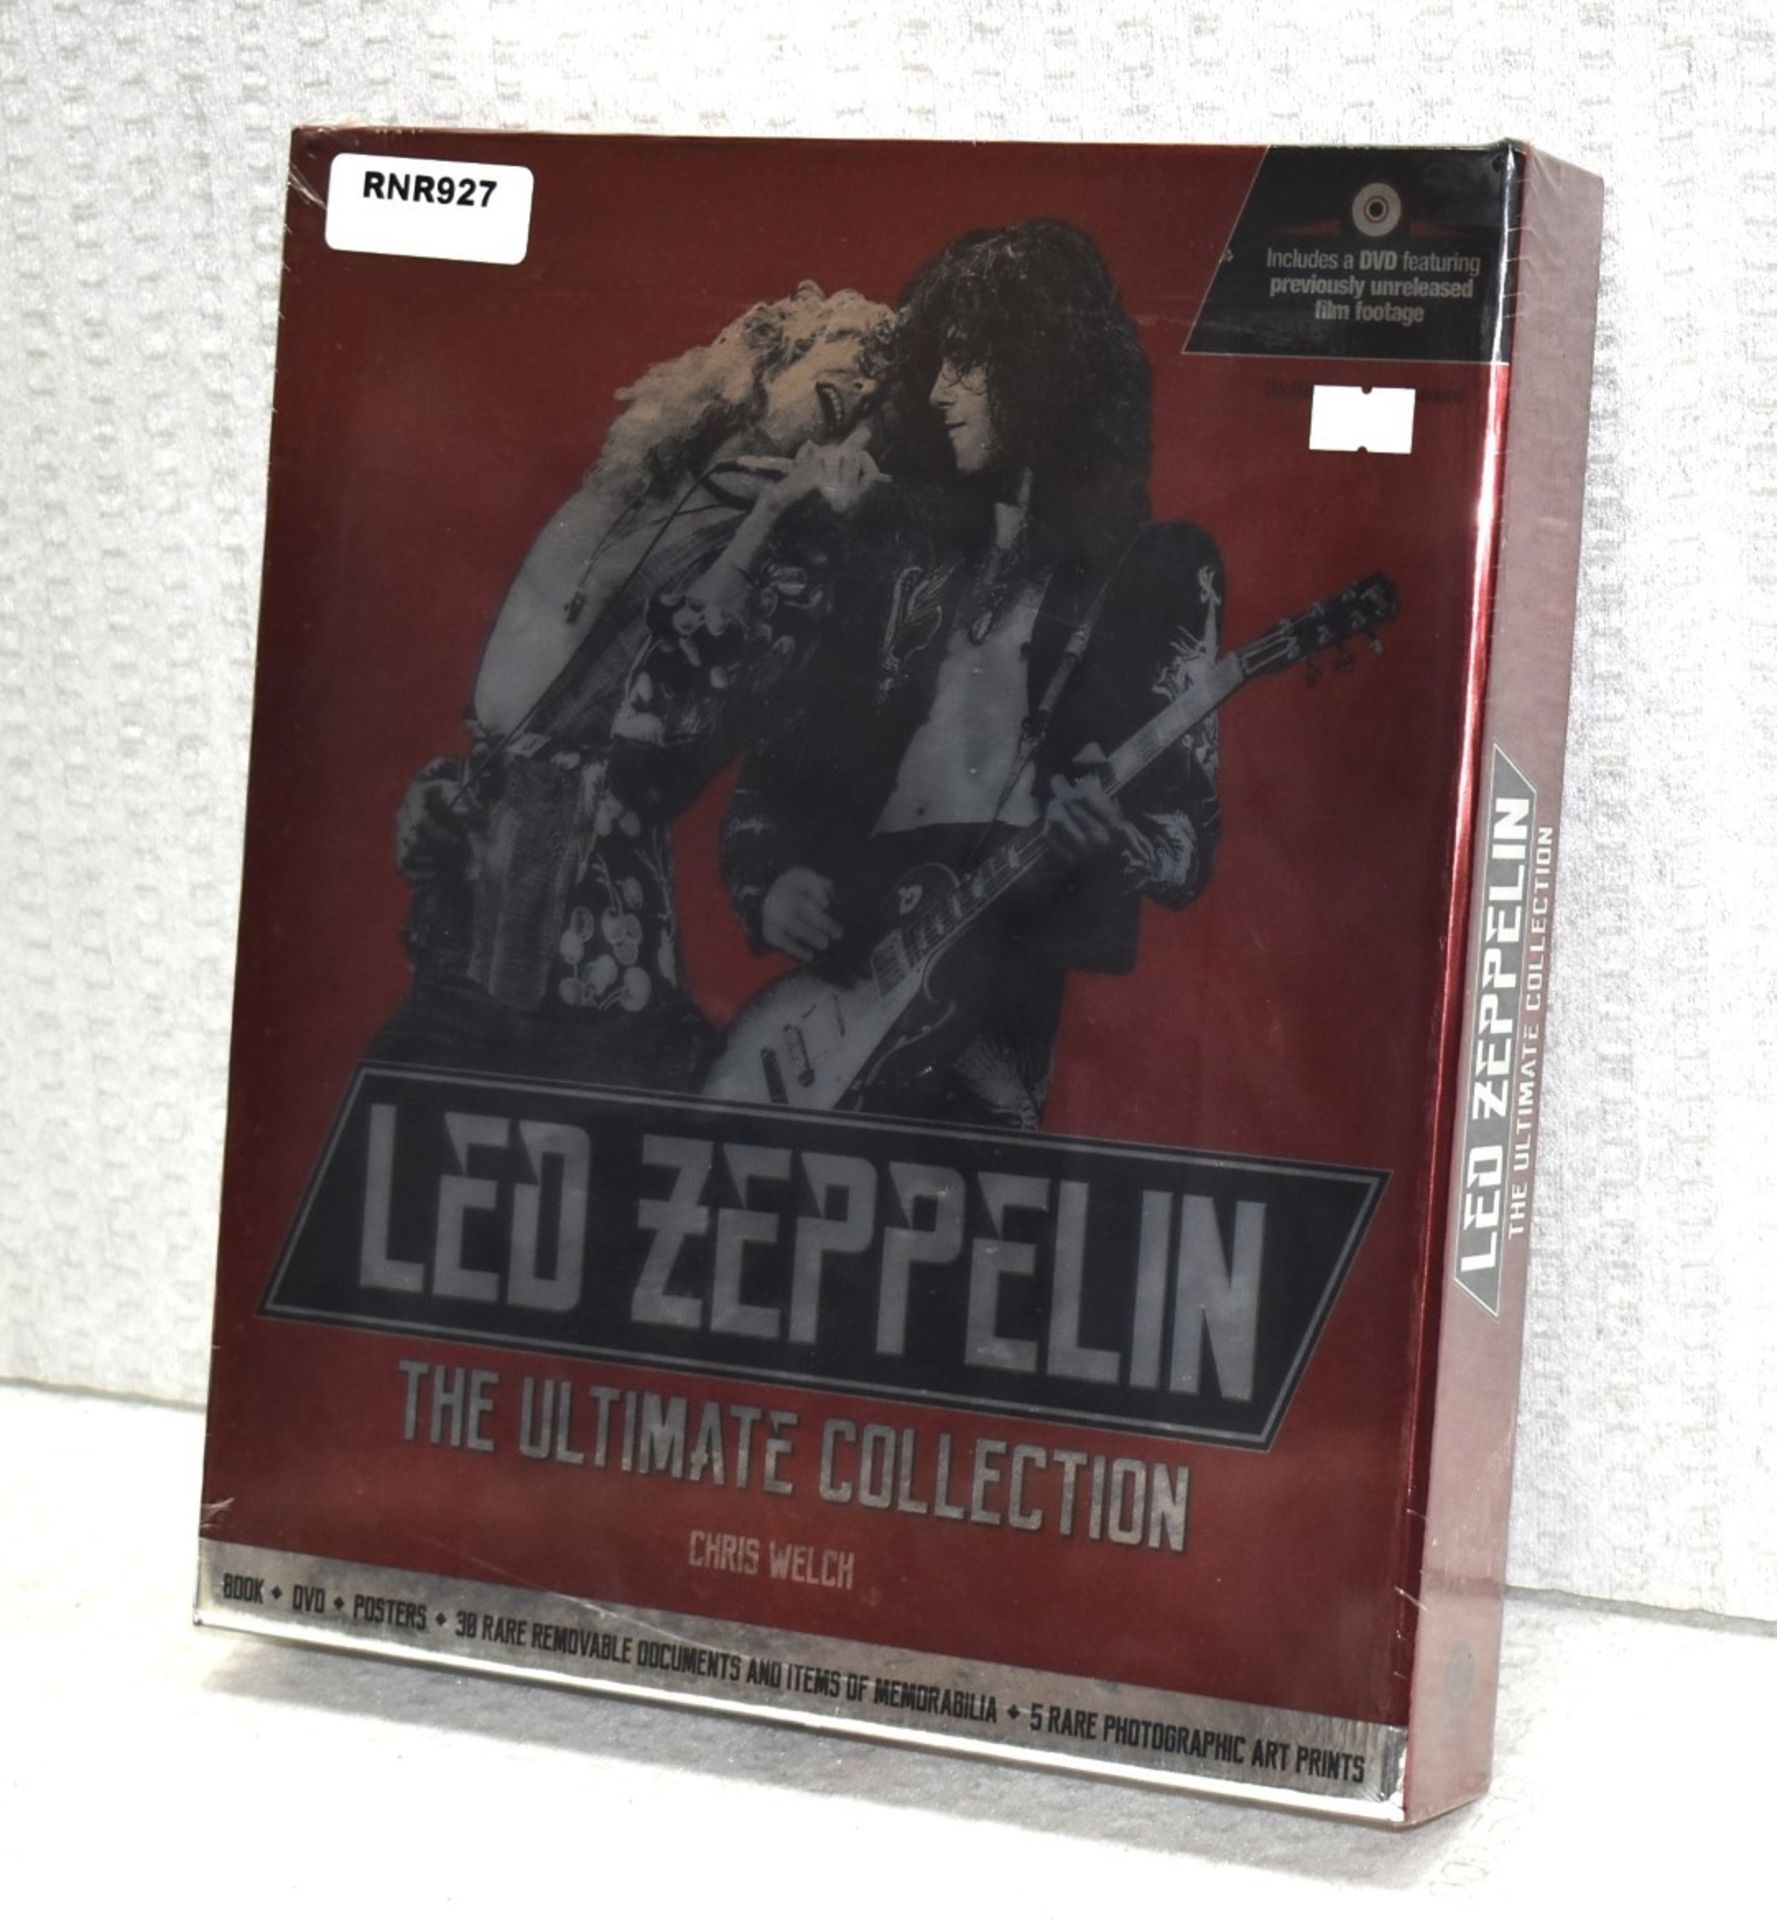 1 x Led Zeppelin The Ultimate Collection Box Set - Includes Book, Documents, DVD, Posters and Photos